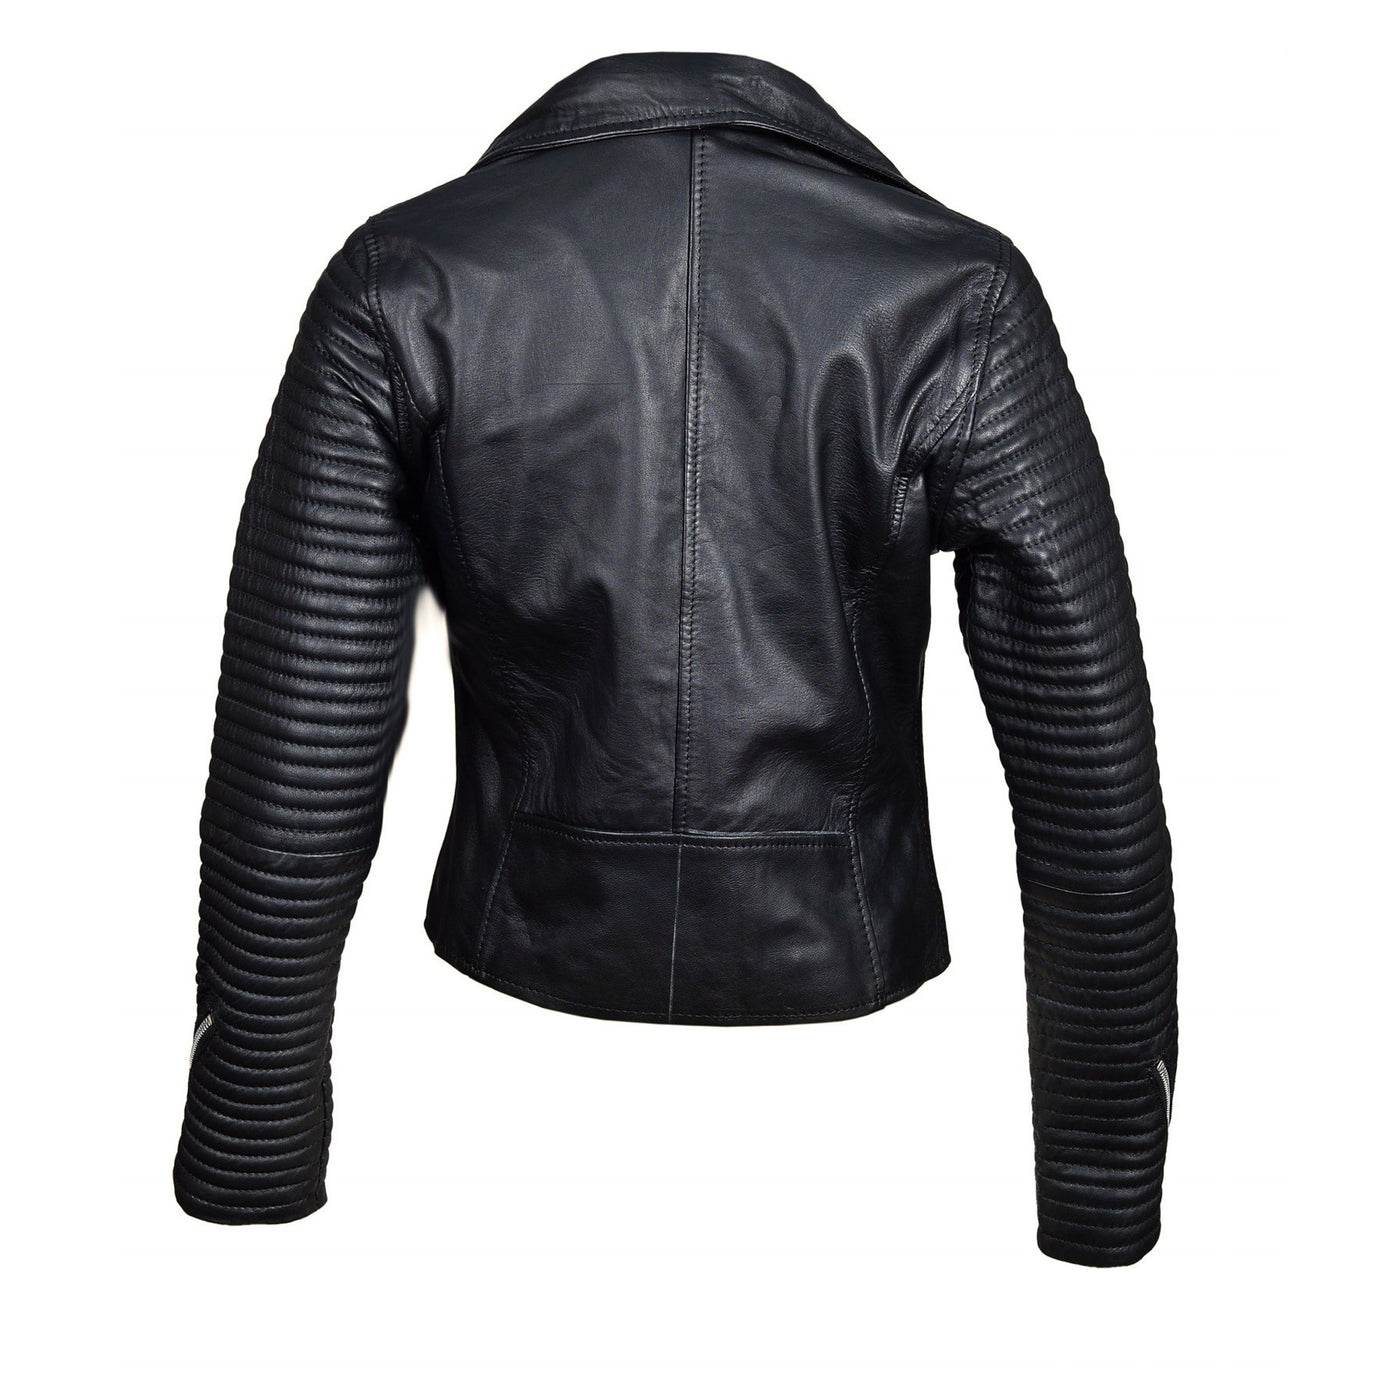 Nyah's Biker Style Jacket With Ribbed Sleeves – Lusso Leather